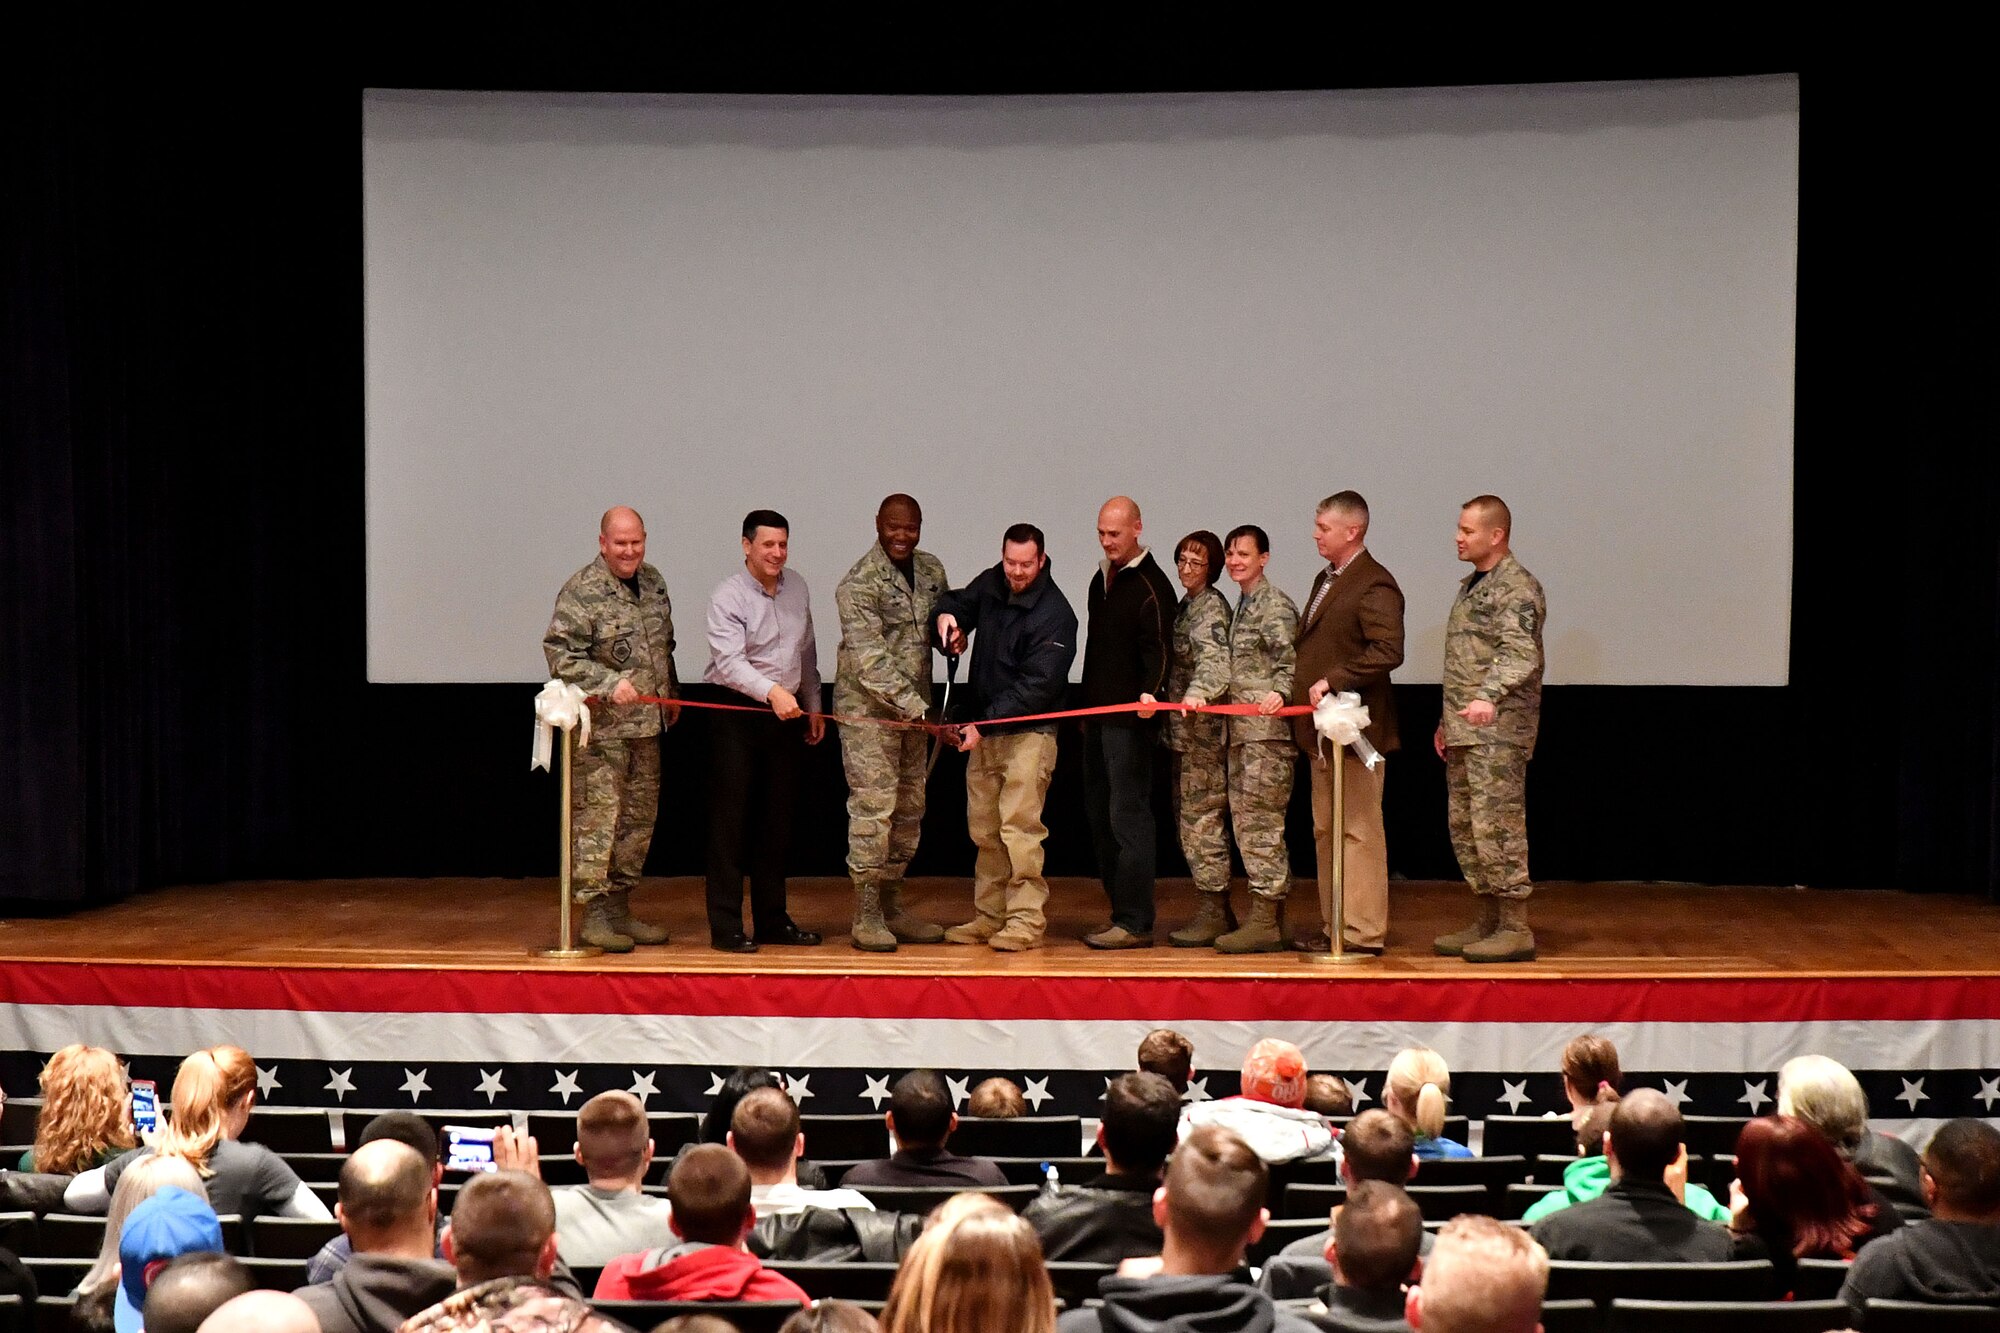 Leaders from the 319th Air Base Wing join with Army & Air Force Exchange Service leaders to cut the ribbon and reopen the base theater on Grand Forks Air Force Base, N.D., Dec. 16, 2016. Renovations to the theater included technological updates the point-of-sale systems, the projection system and the sound system. (U.S. Air Force photo by Airman 1st Class Elijaih Tiggs)